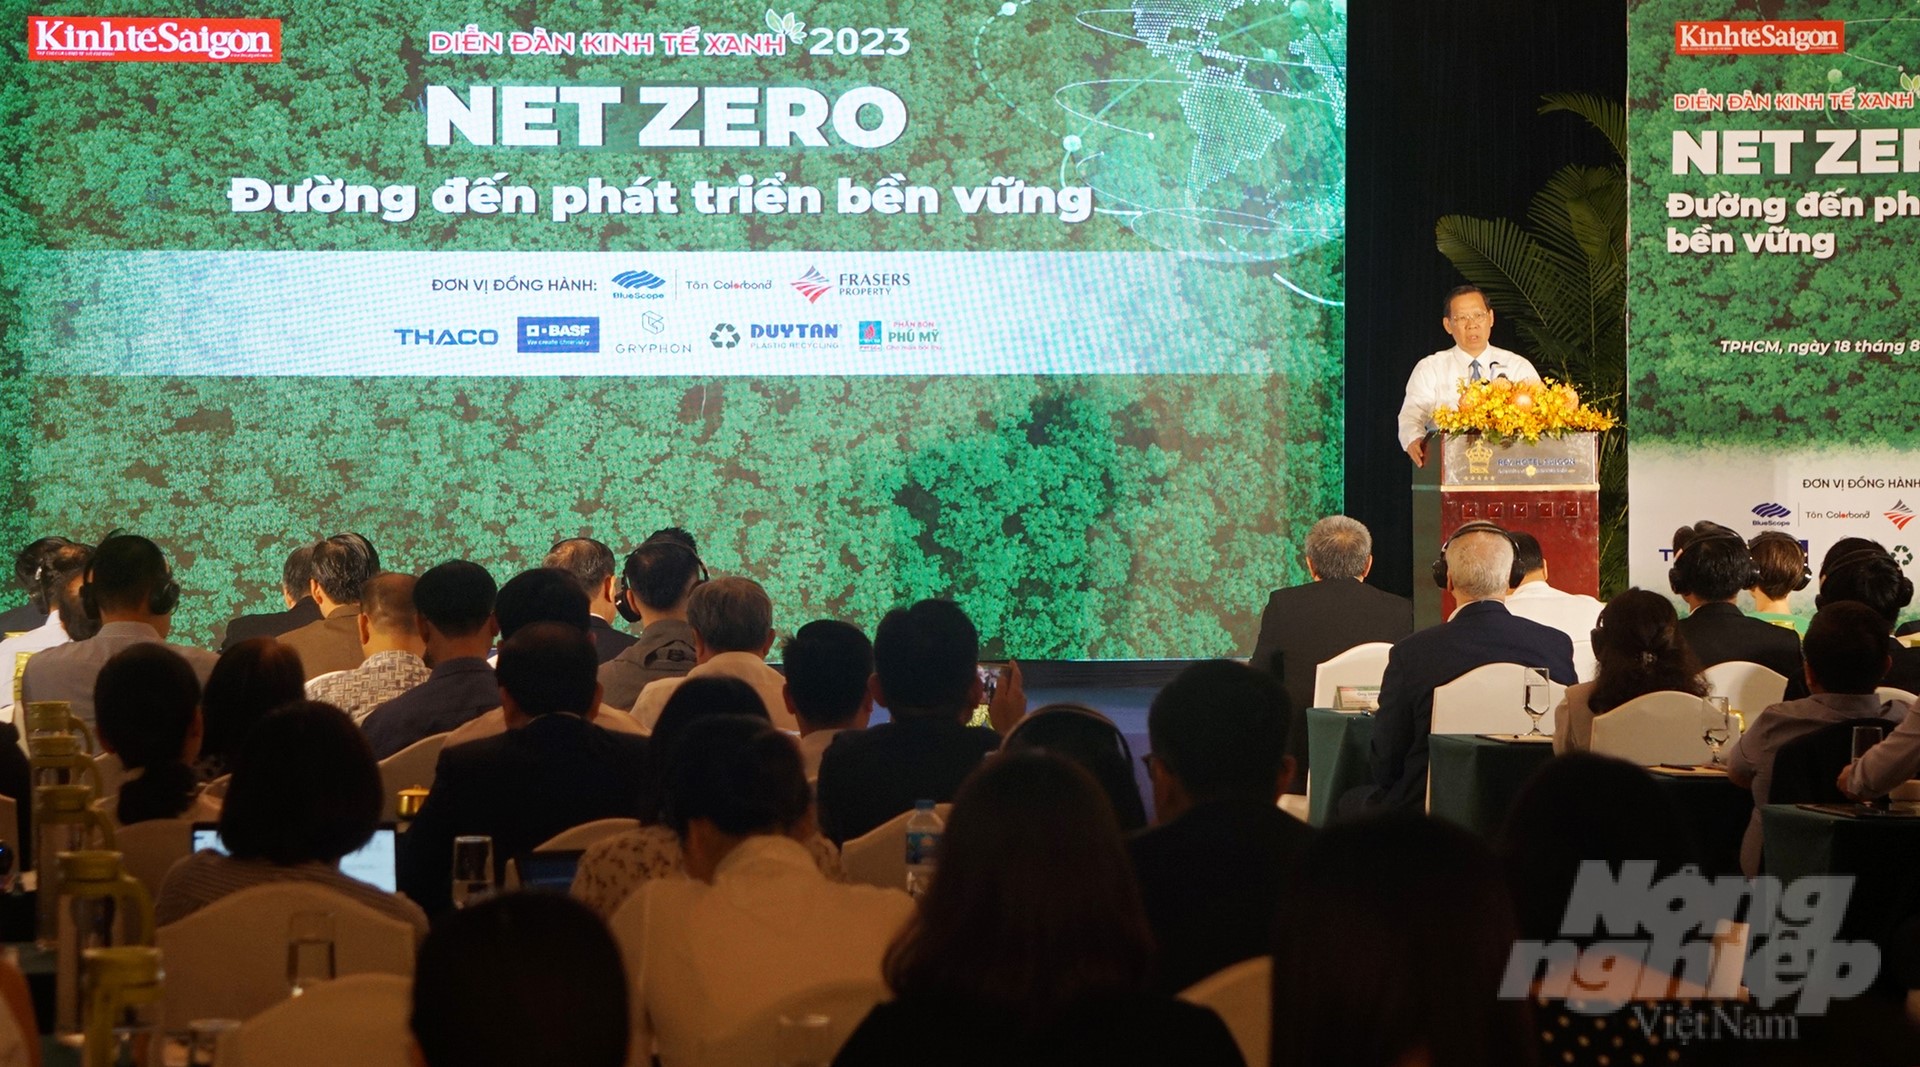 Chairman of the Ho Chi Minh City People's Committee Phan Van Mai speaks at the Green Economy Forum. Photo: Nguyen Thuy.